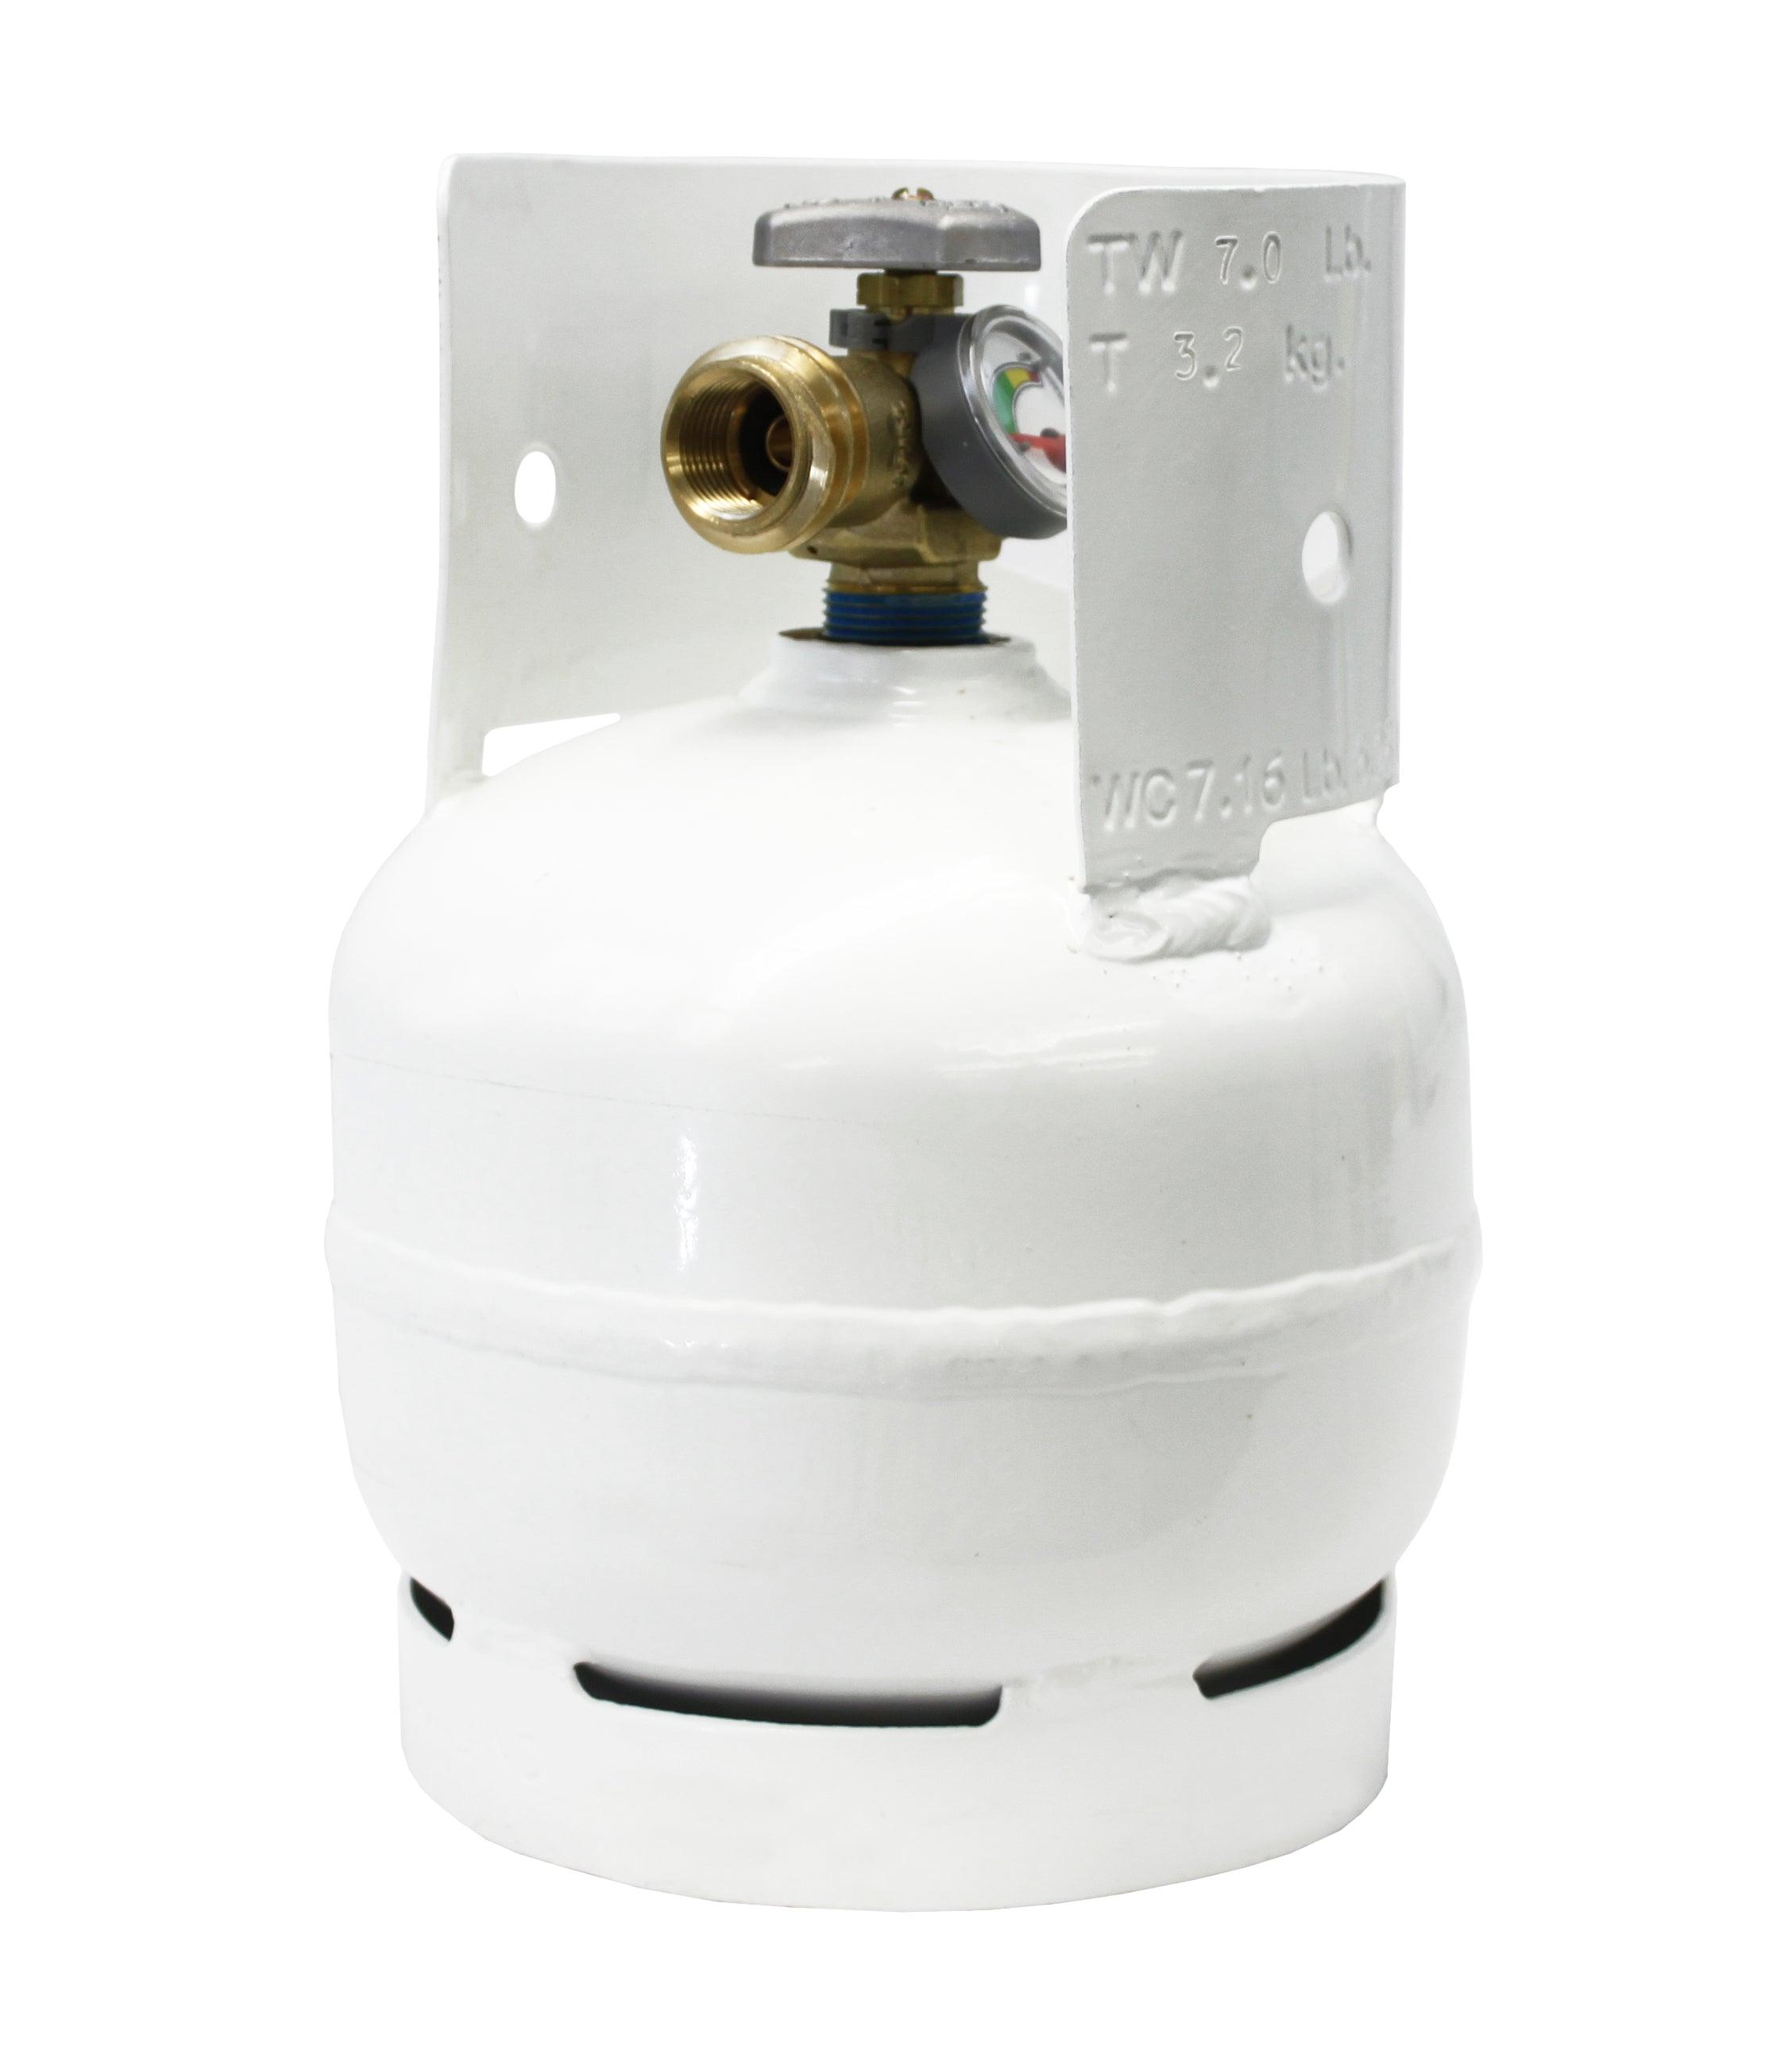 Flame King 3lb Steel Propane LP Tank Cylinder with Gauge and OPD - Flame King